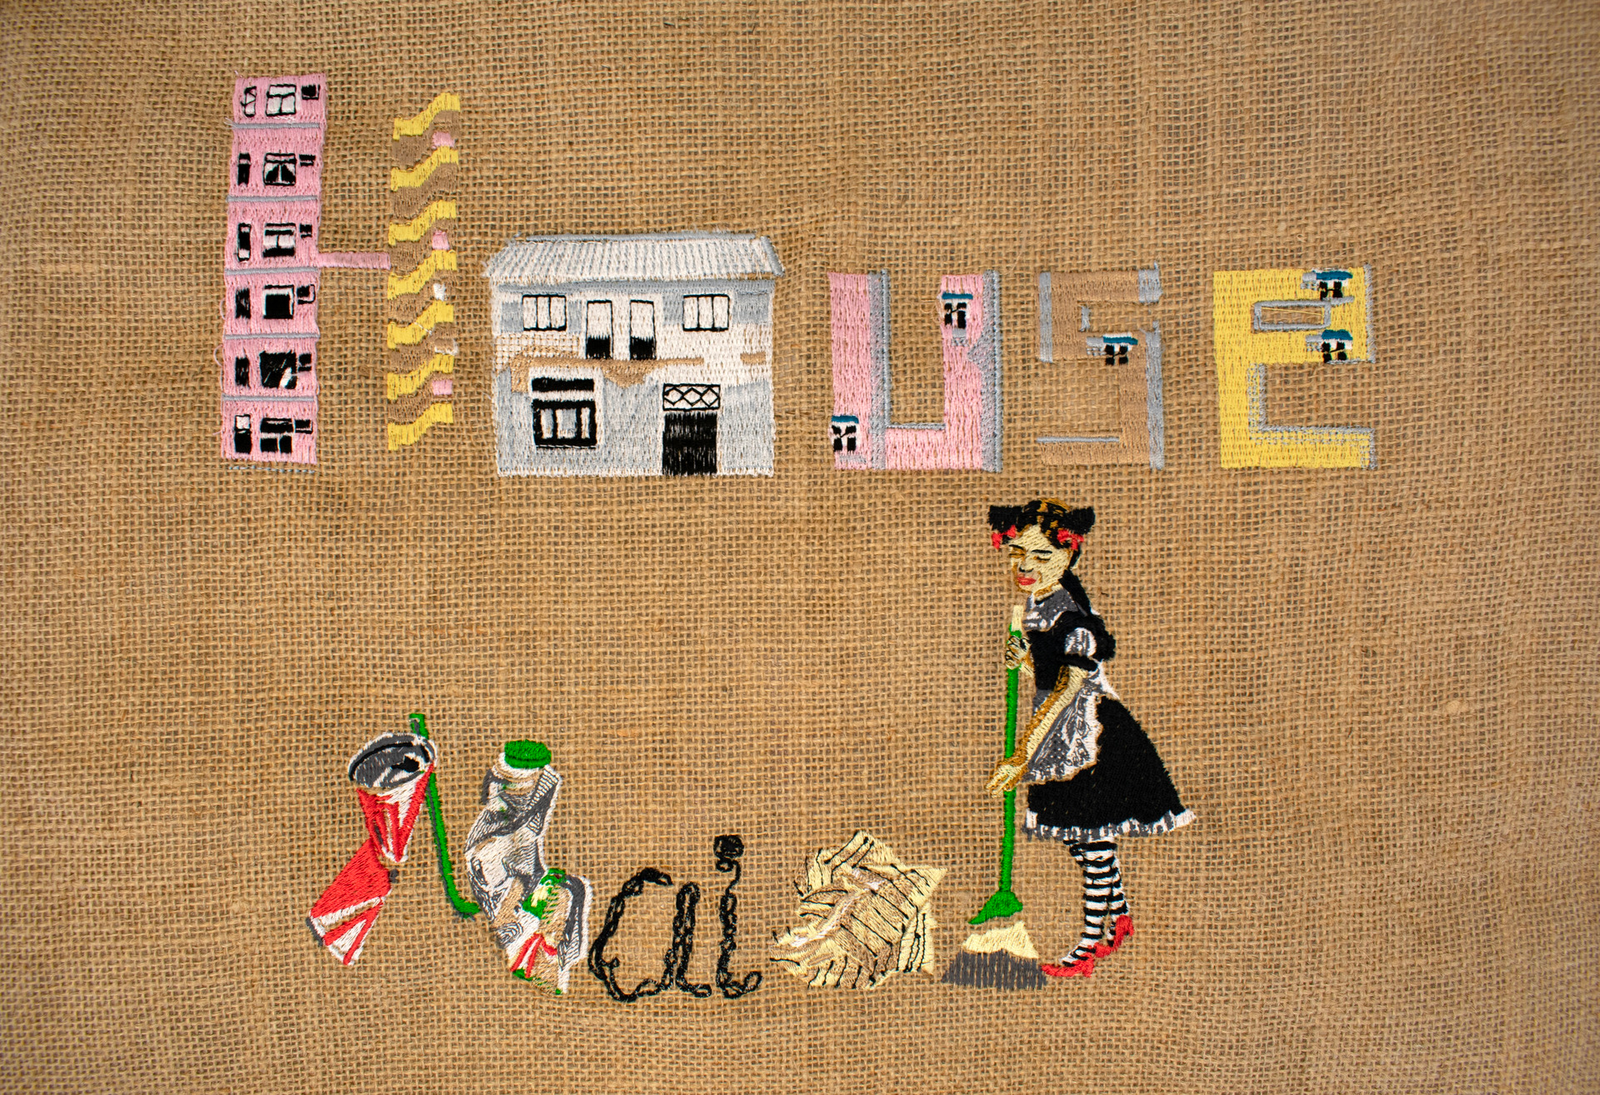 Digitally embroidered motifs which makes up the letters of 'House Wife' on a jute bag.